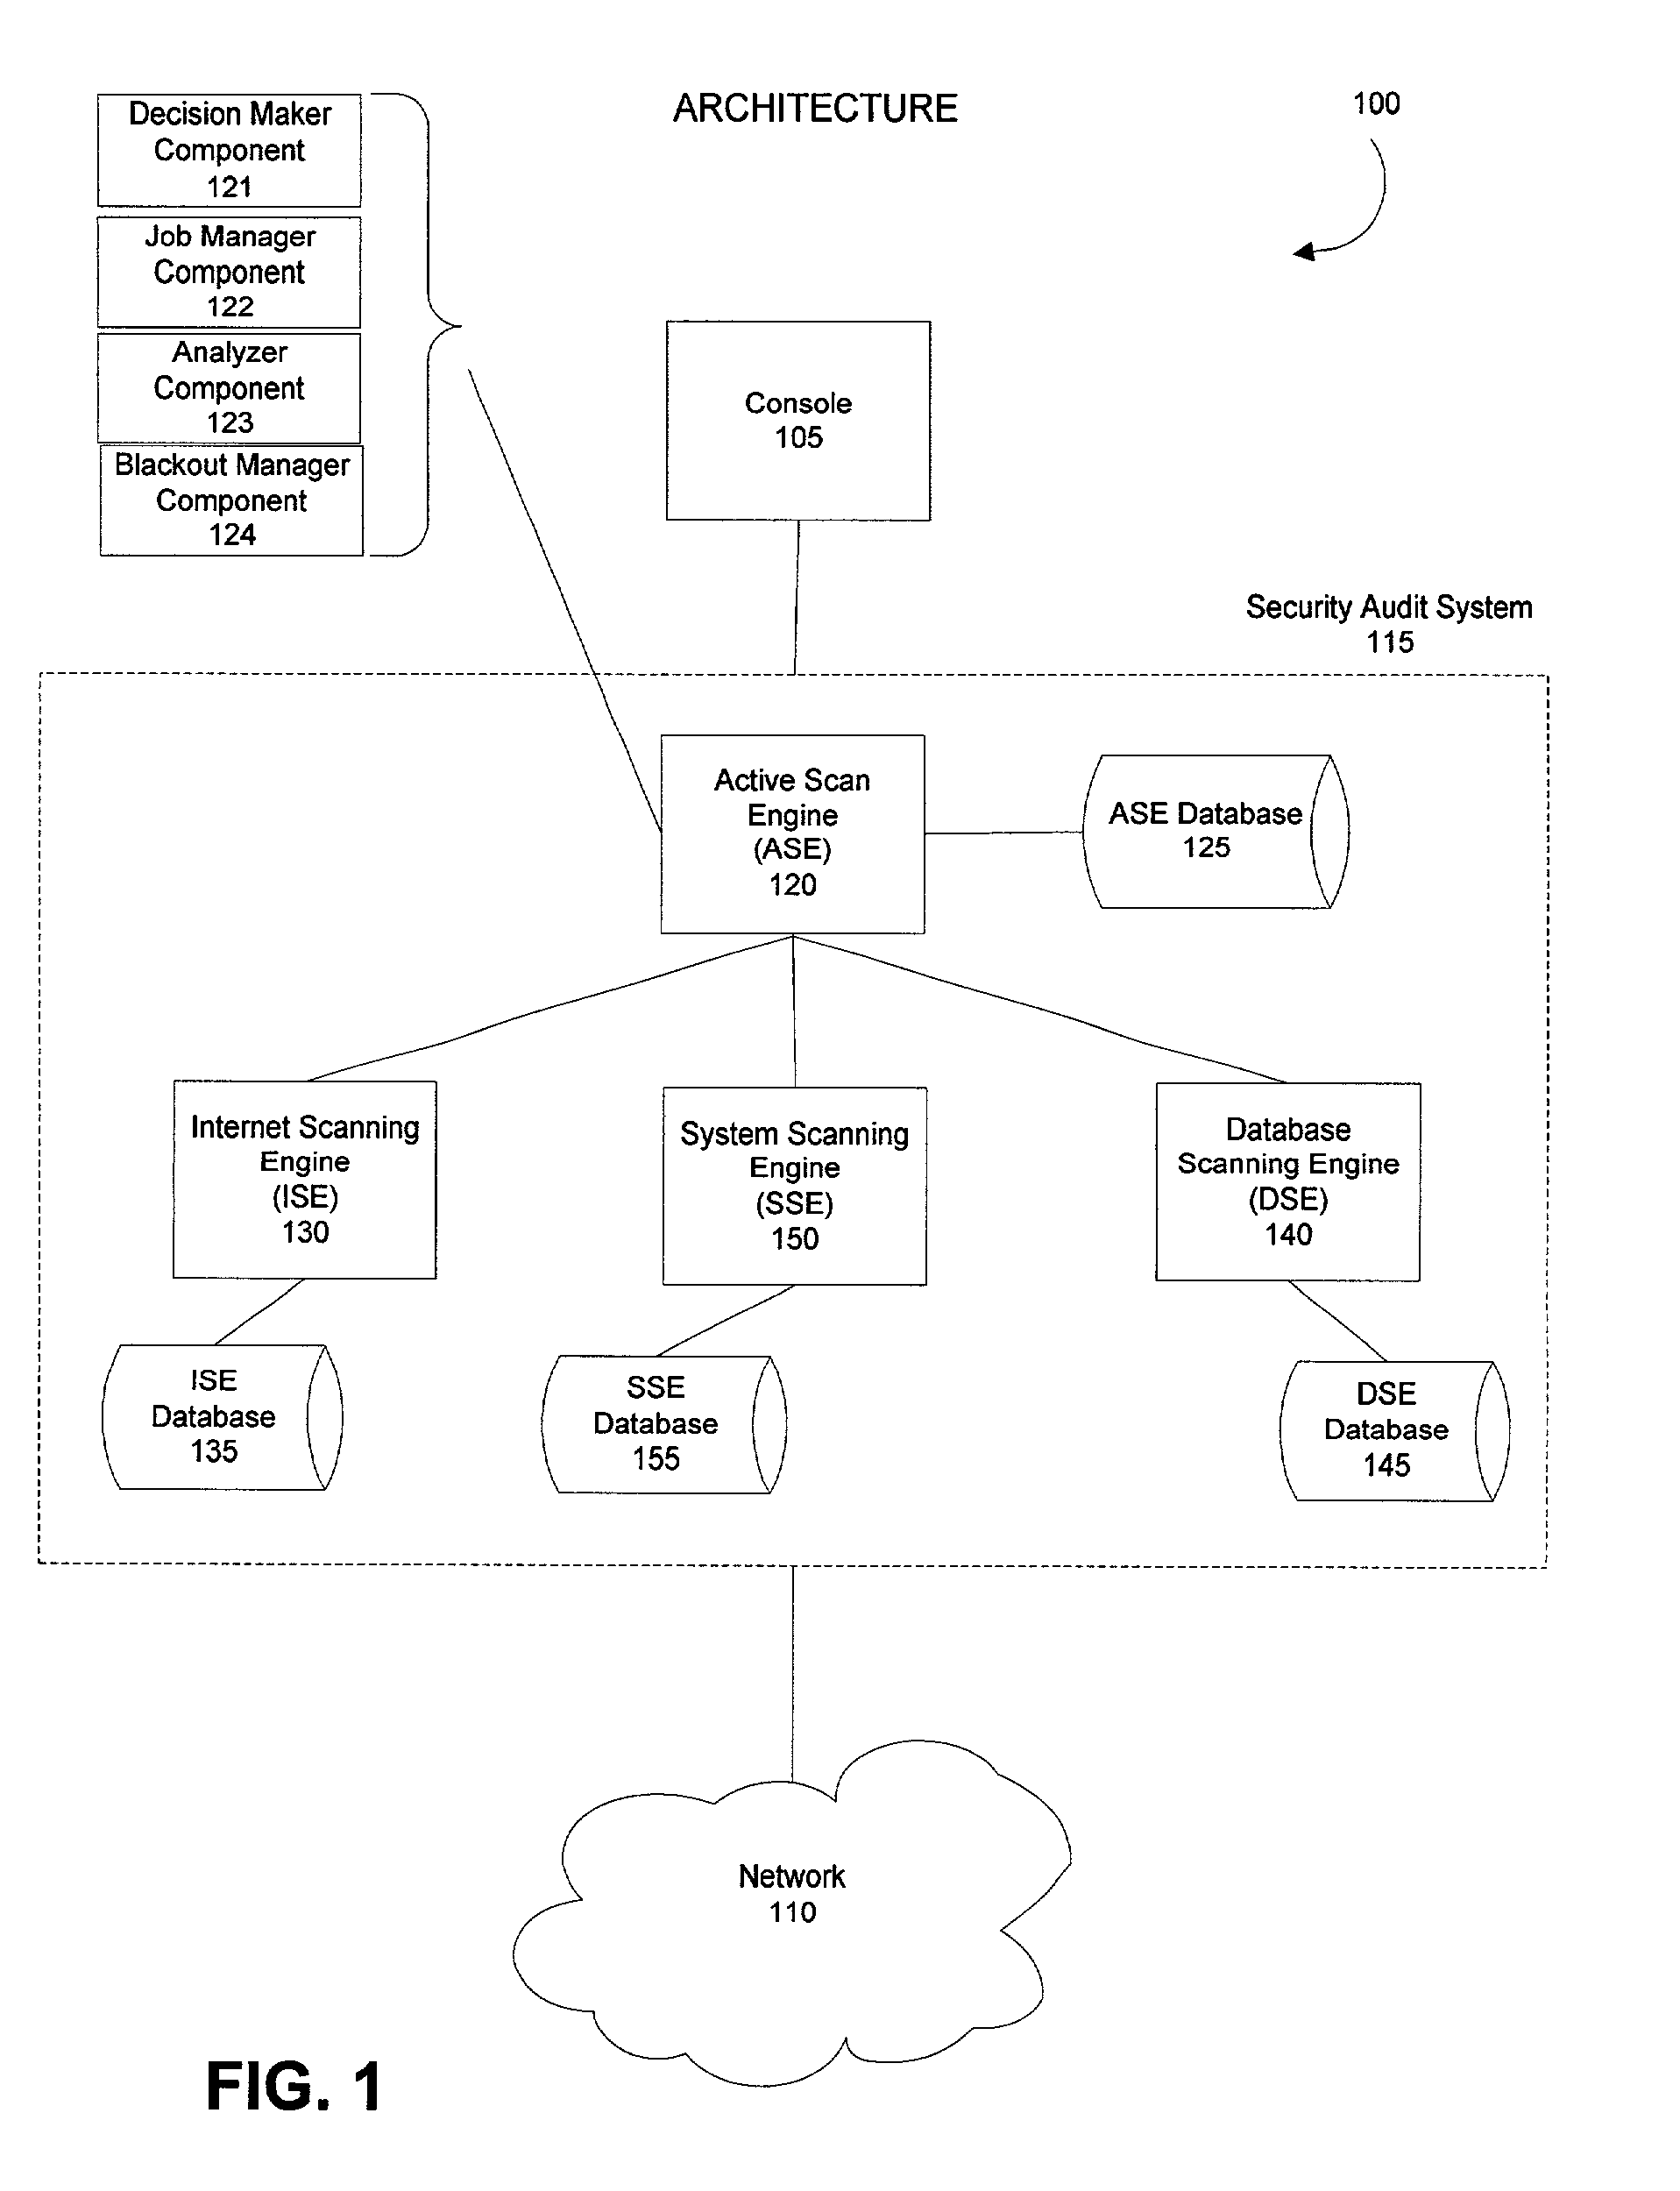 Method and system for configuring and scheduling security audits of a computer network